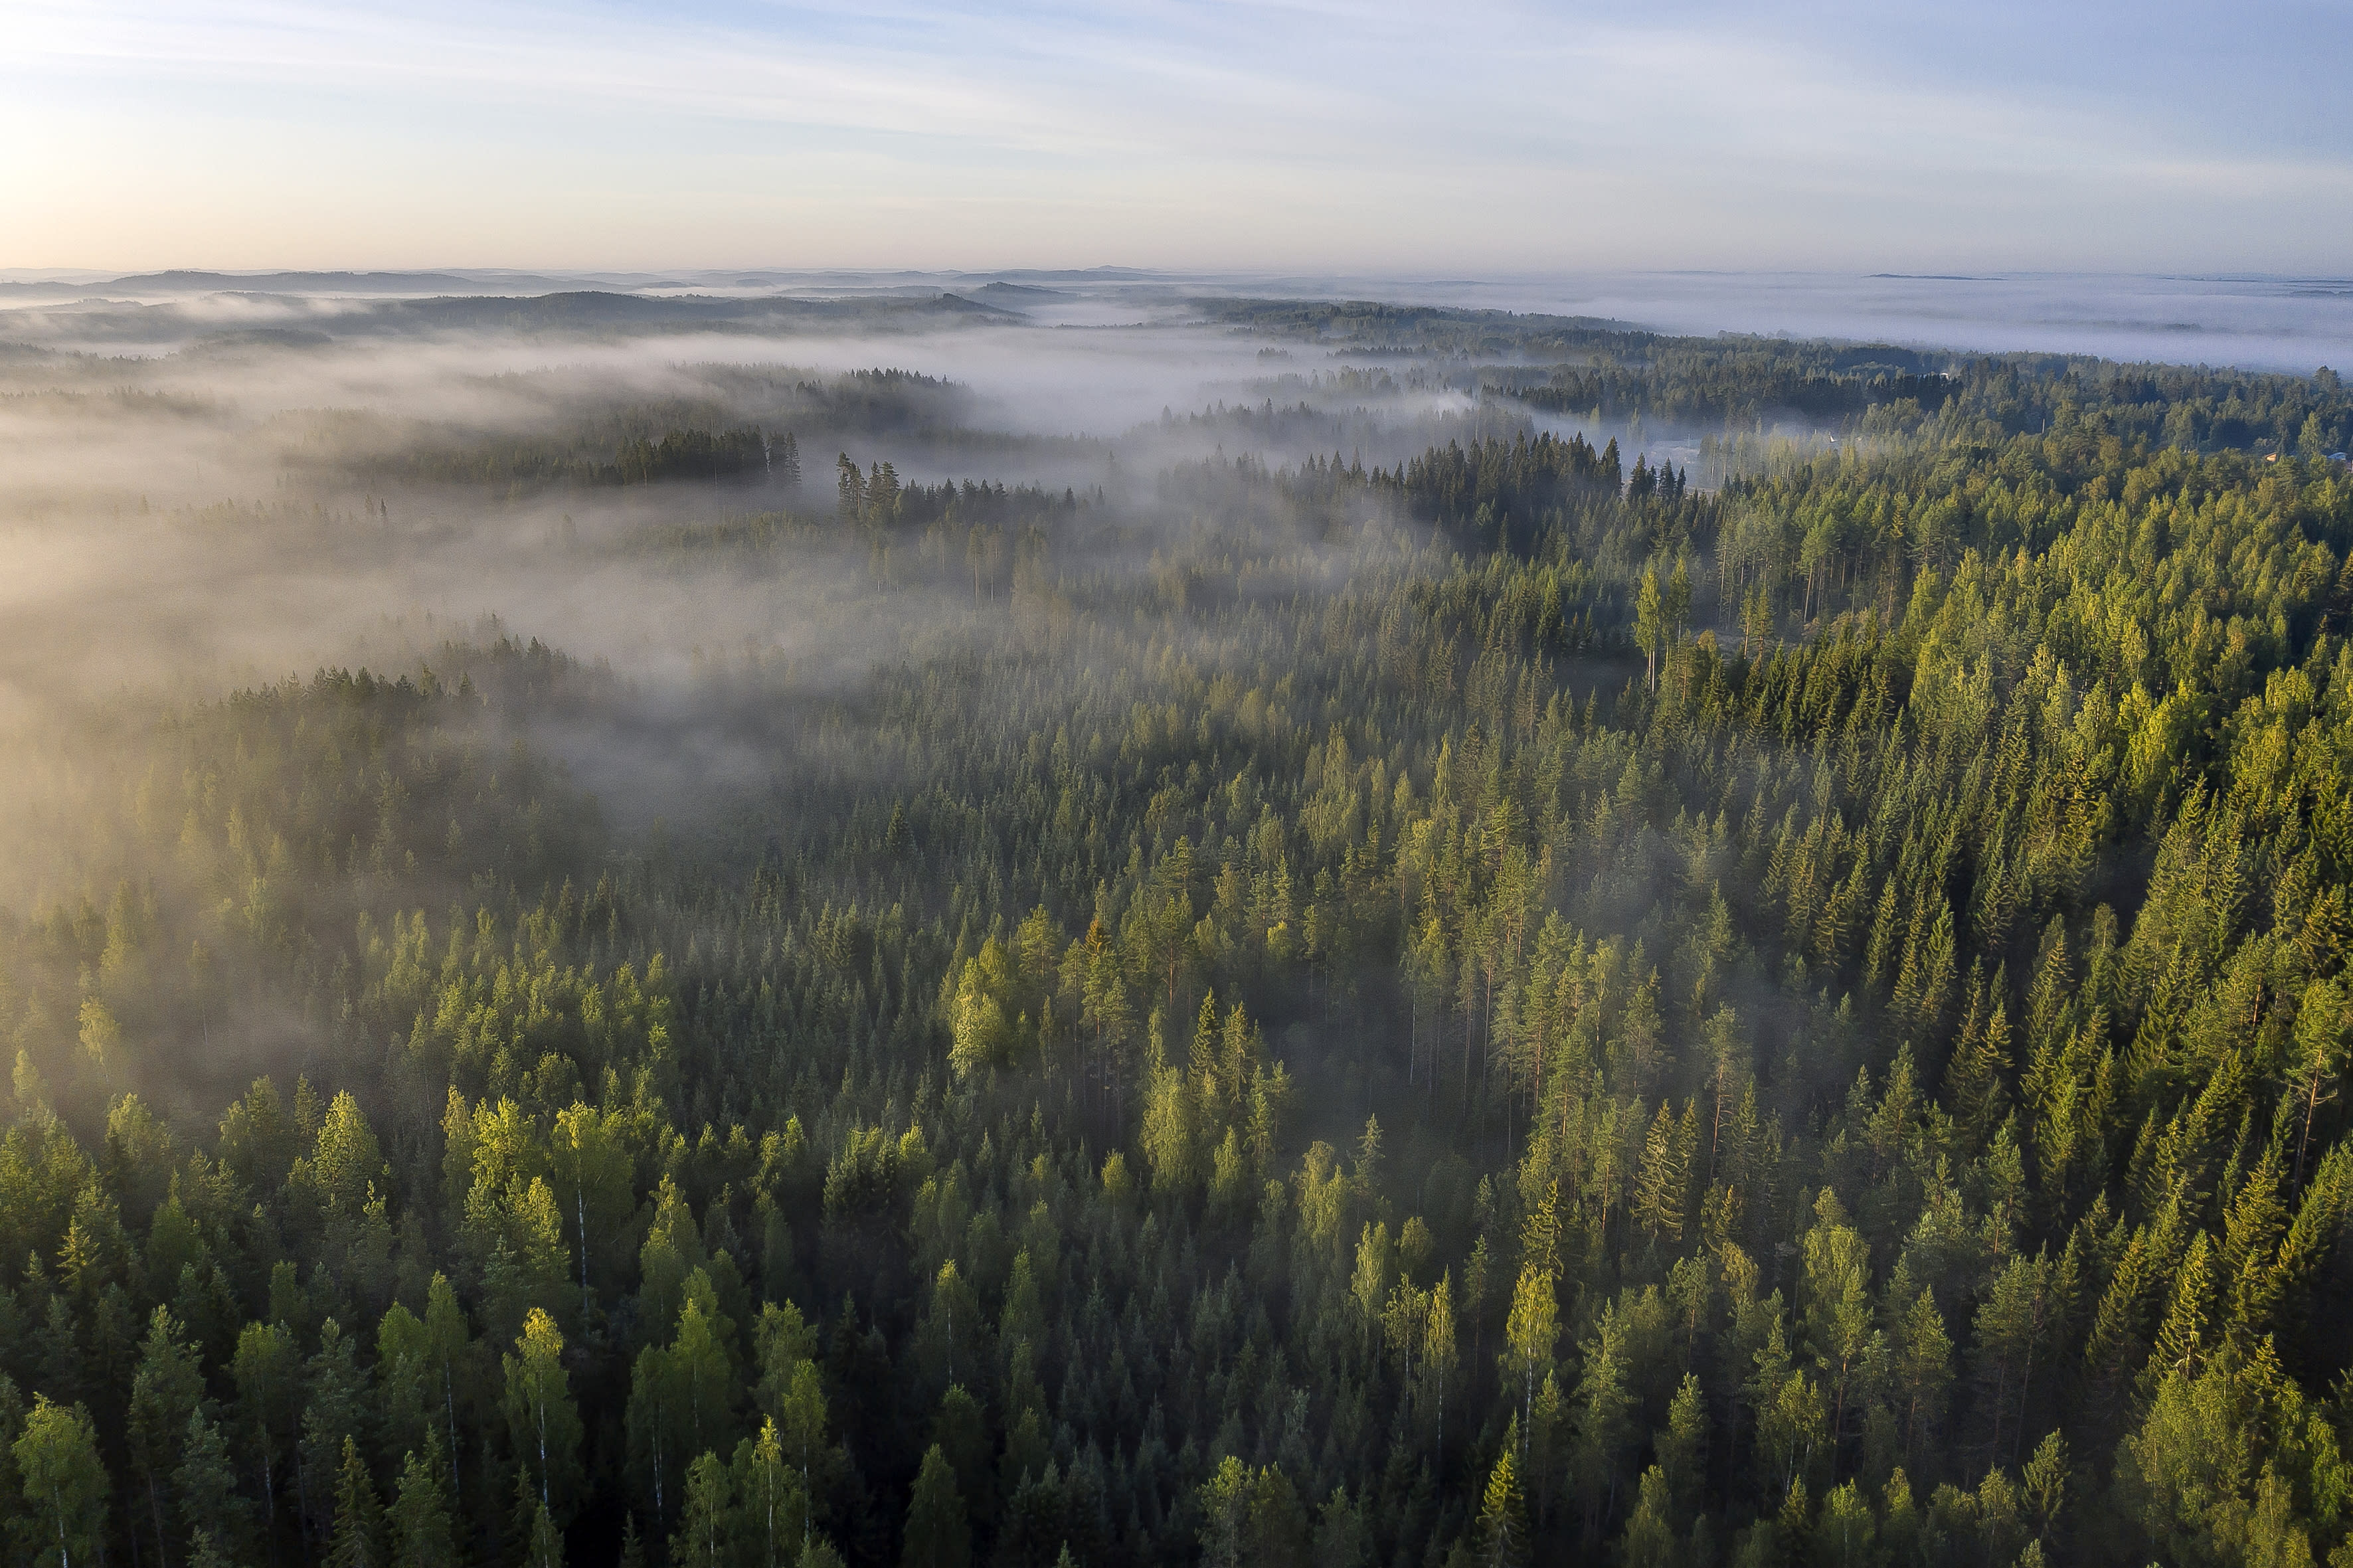 Finland must do more to achieve the emission targets, the ministry’s report states